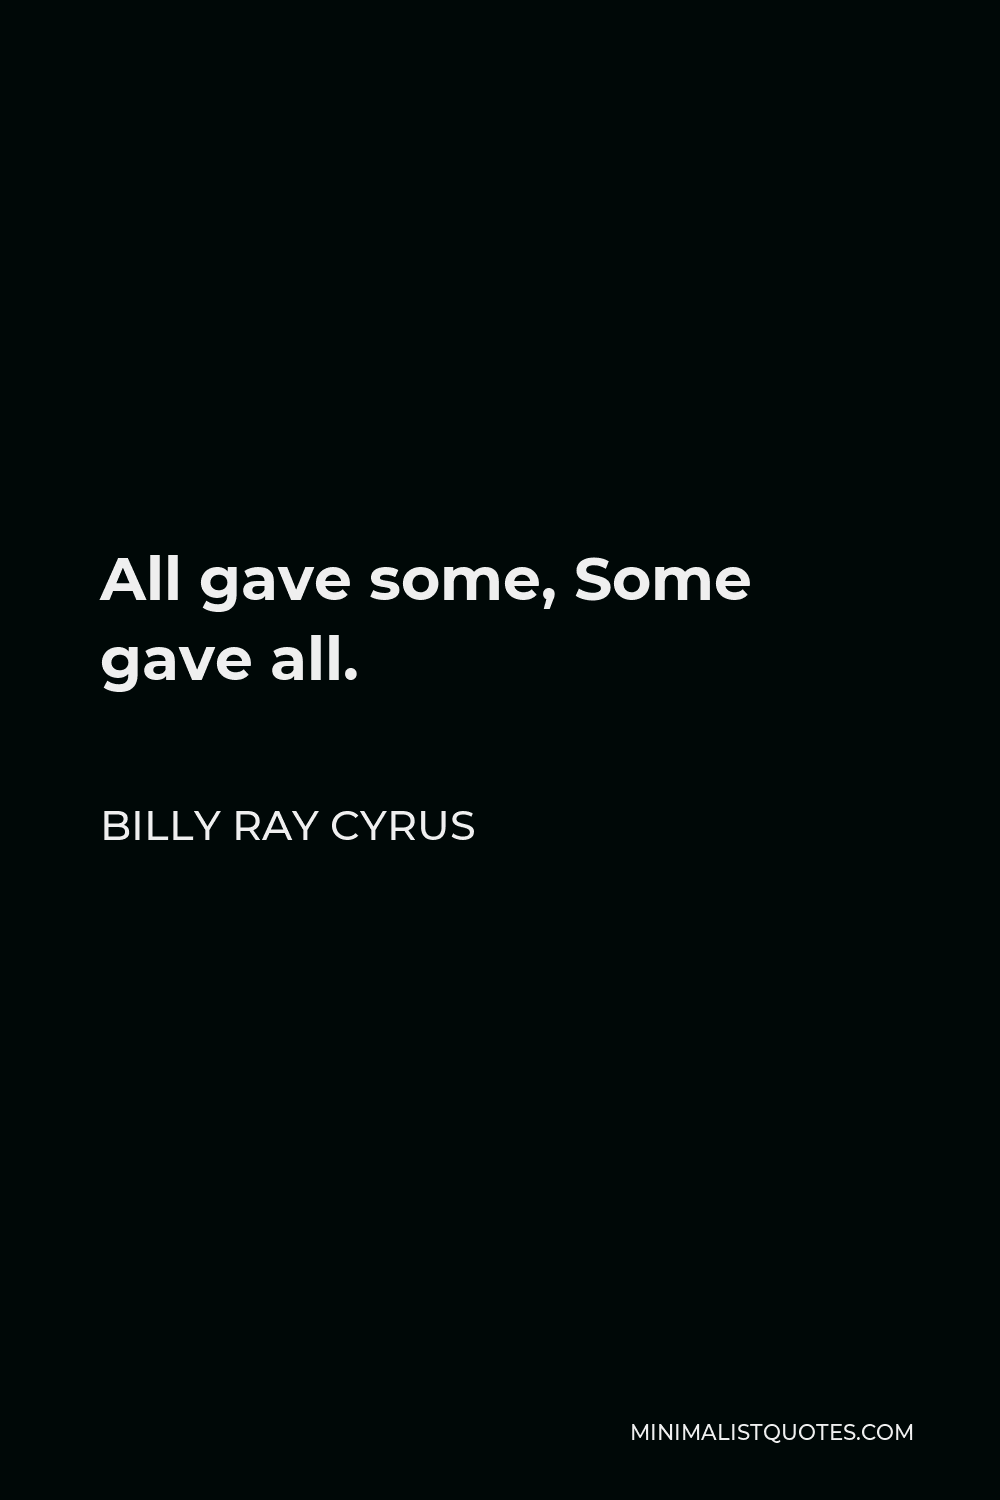 Billy Ray Cyrus Quote - All gave some, Some gave all.